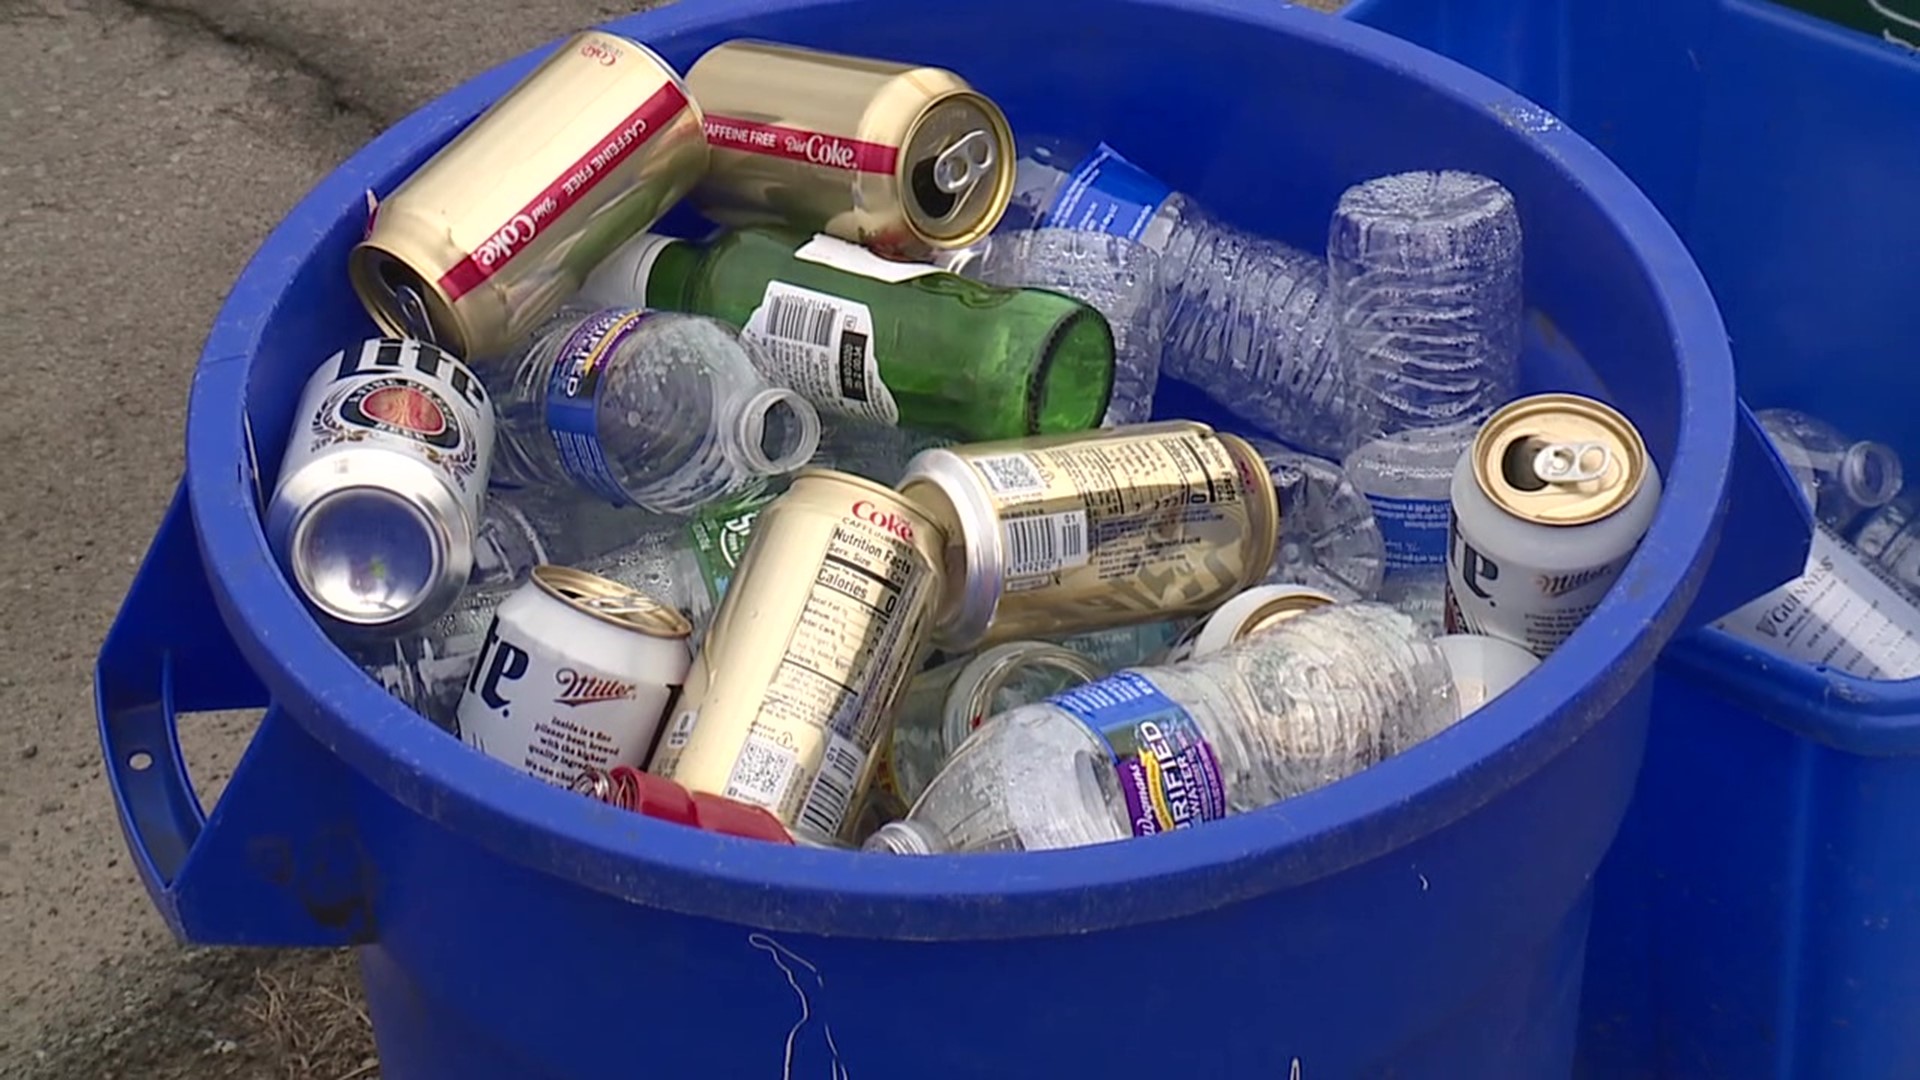 Coronavirus is now affecting what can be picked up from your curb. Many people who live in Lackawanna County won't have their glass and plastic picked up next week.